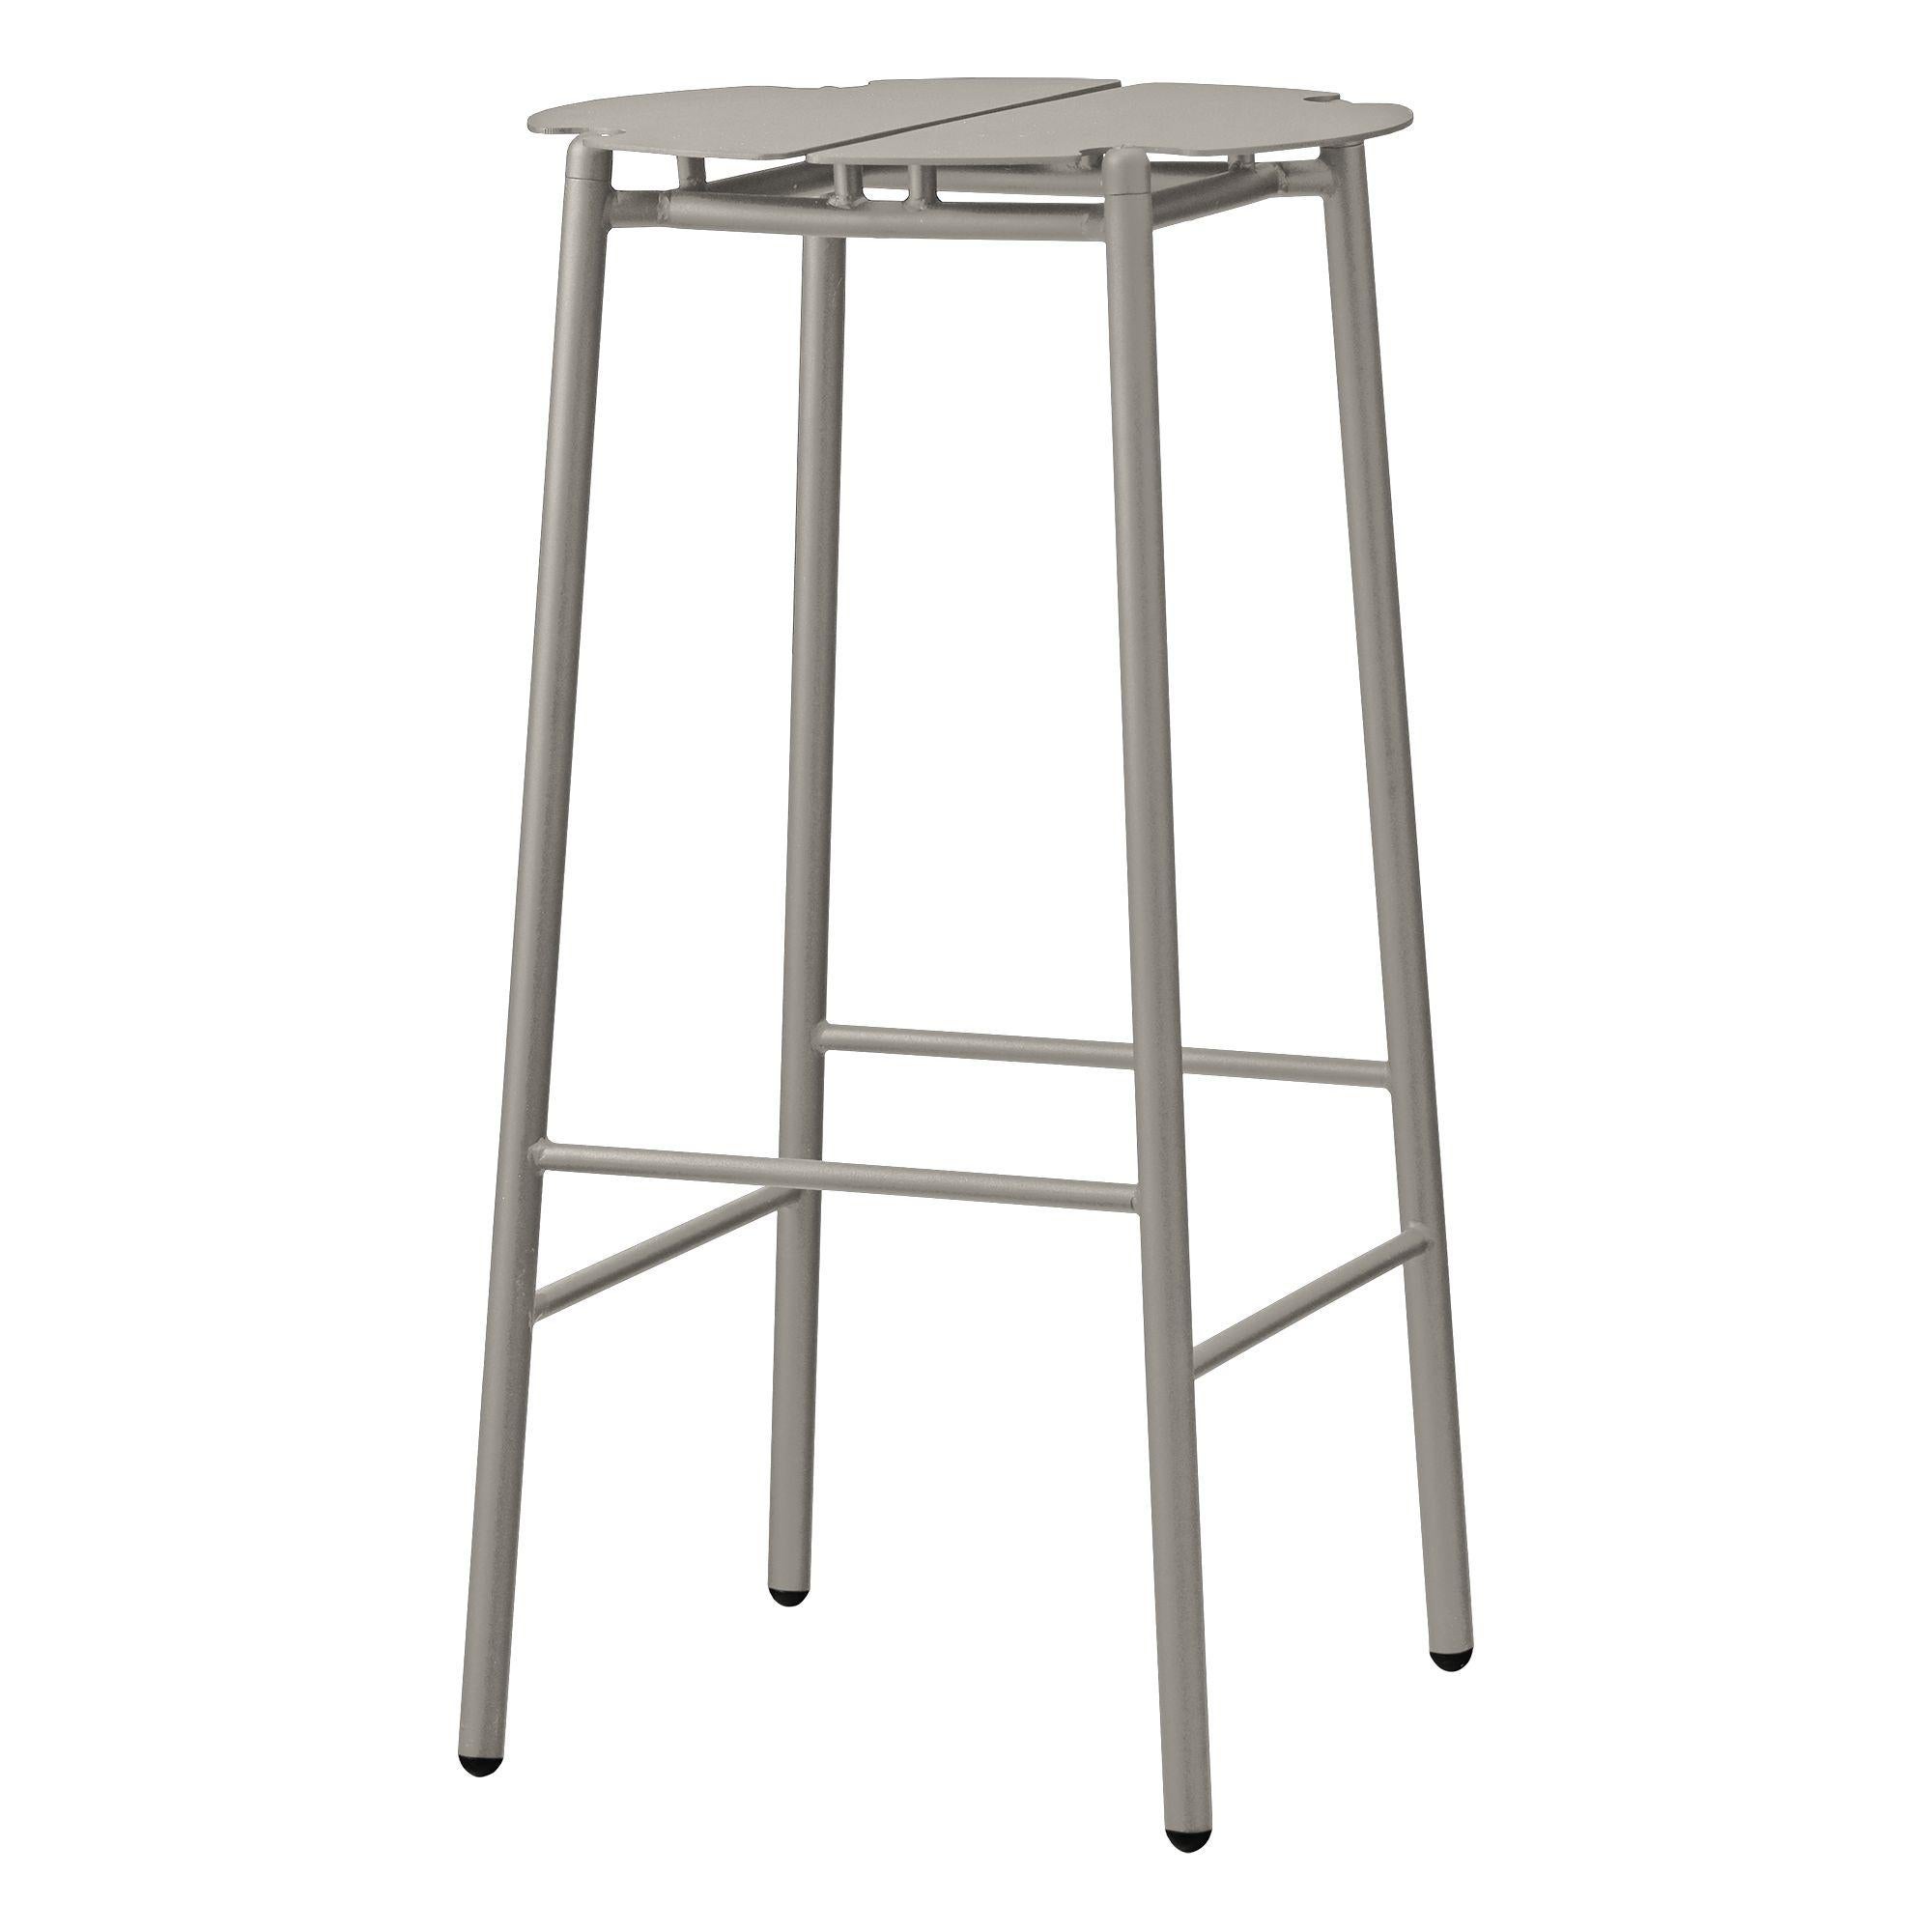 Taupe minimalist bar stool
Dimensions: Diameter 38 x height 75 cm
Materials: steel w. Matte powder coating & aluminum w. Matte powder coating.
Available in colors: taupe, bordeaux, forest, ginger bread, black and, black and gold.

Create a cozy